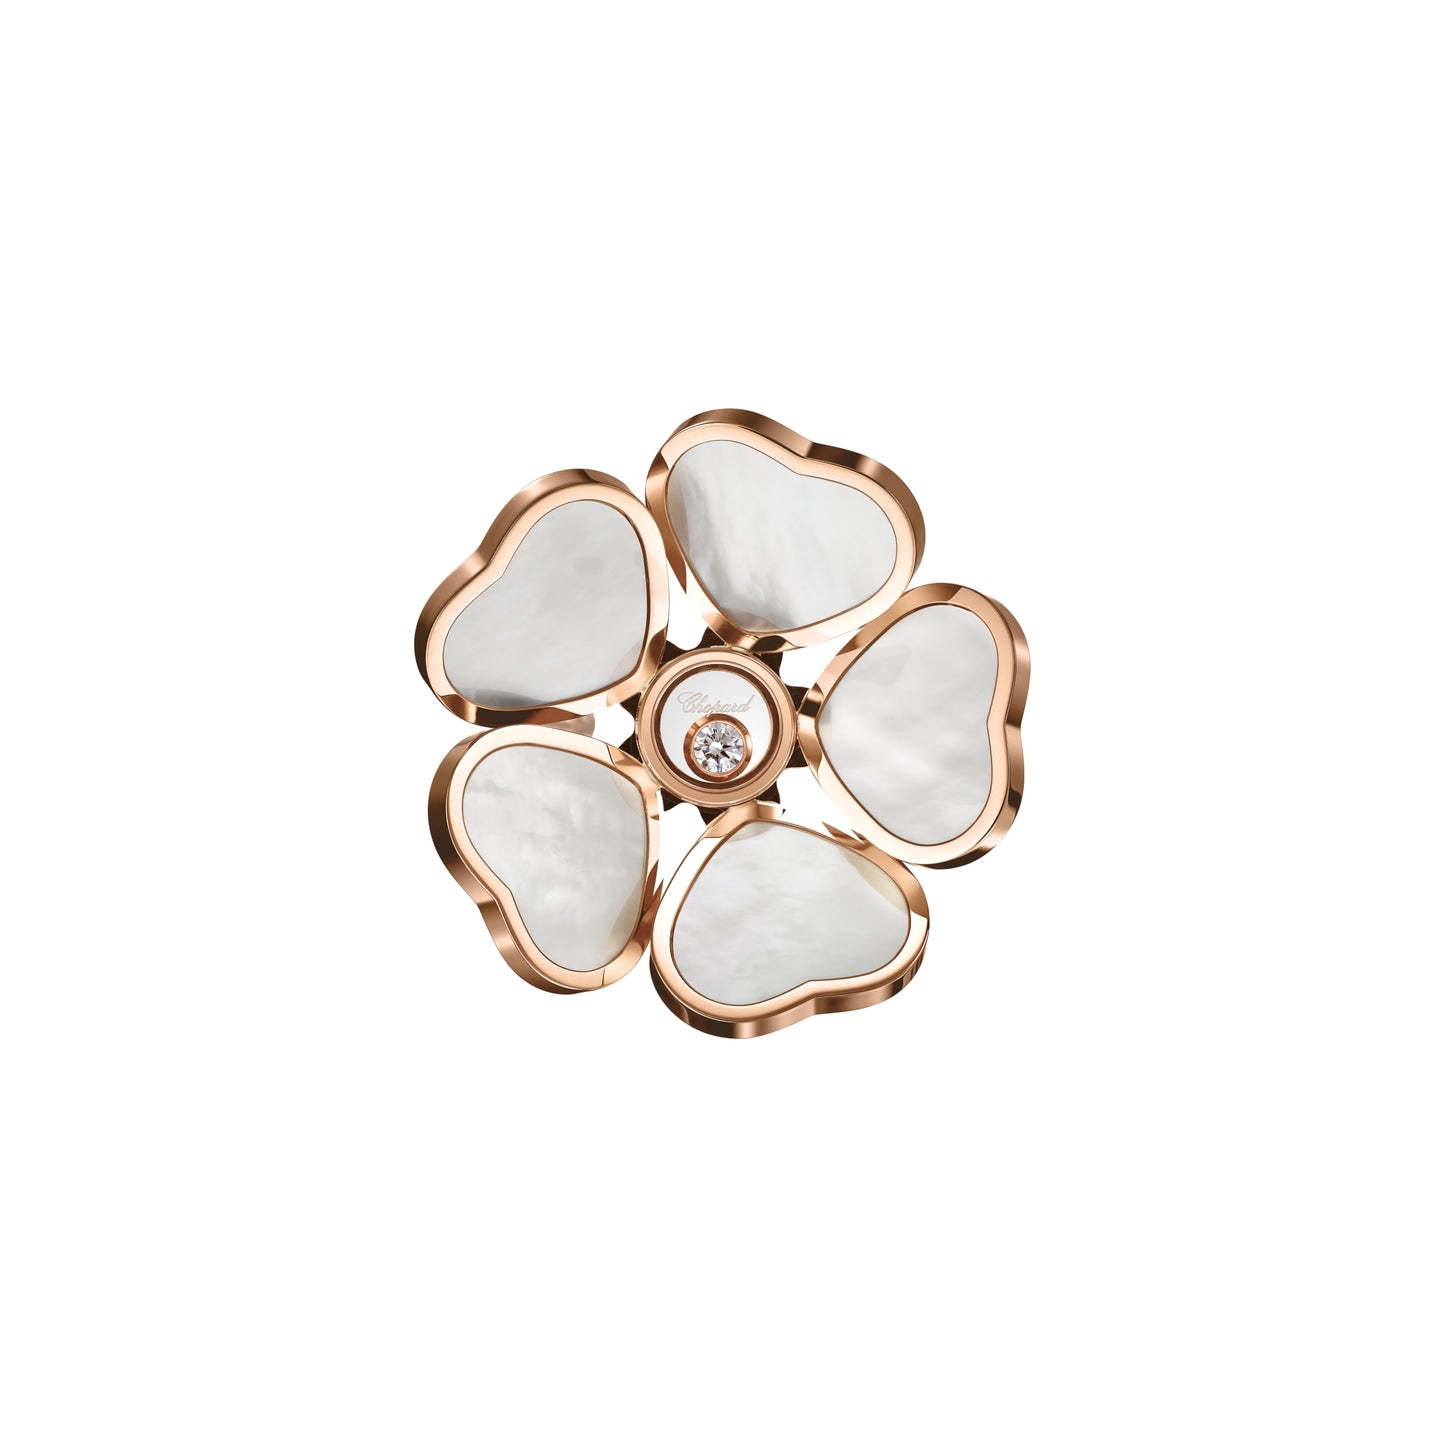 HAPPY HEARTS FLOWERS RING, ETHICAL ROSE GOLD, DIAMOND, MOTHER-OF-PEARL 82A085-5300